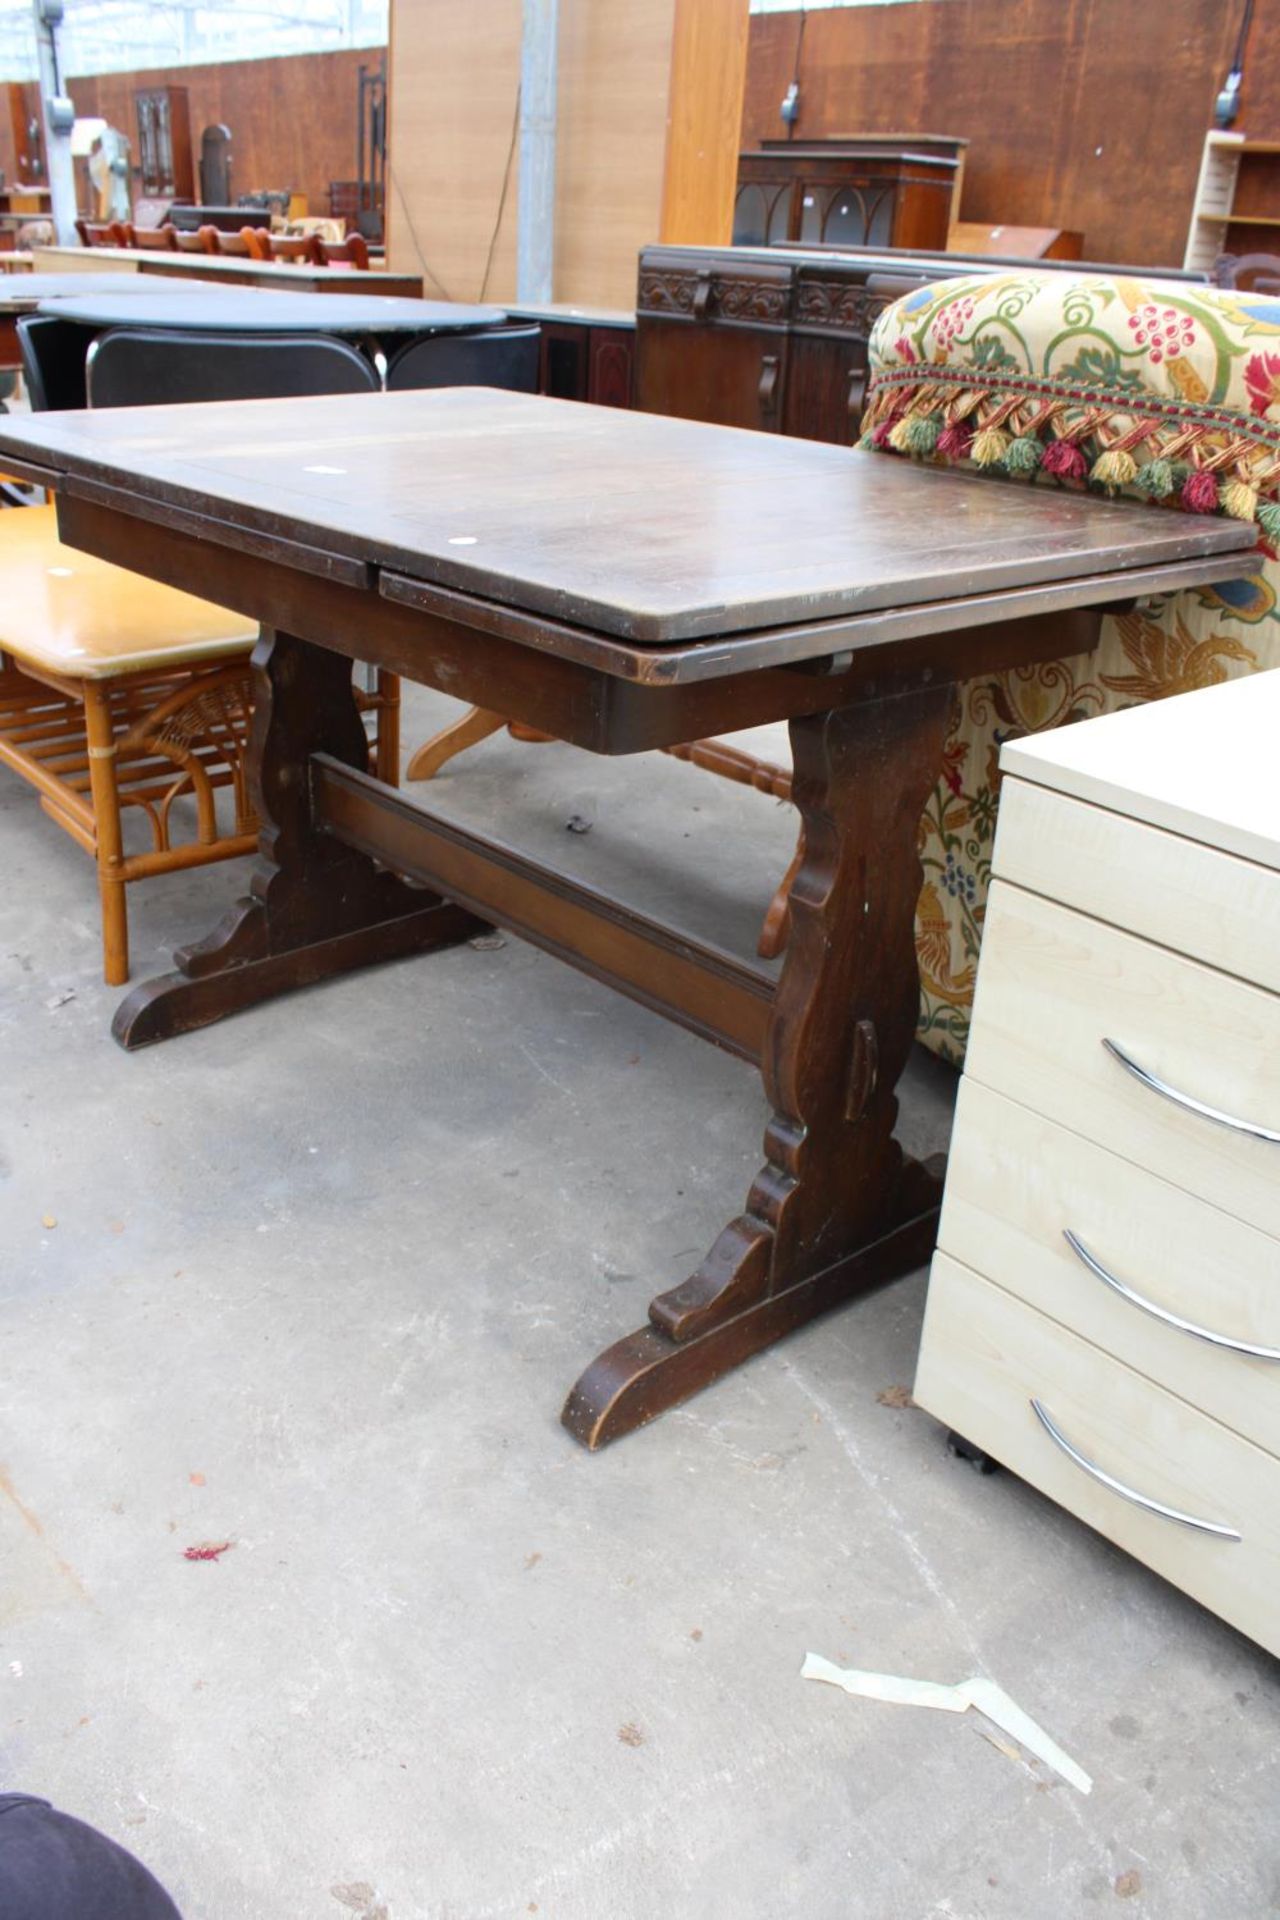 A MID 20TH CENTURY ERCOL BLUE LABEL DRAW-LEAF DINING TABLE - Image 2 of 2